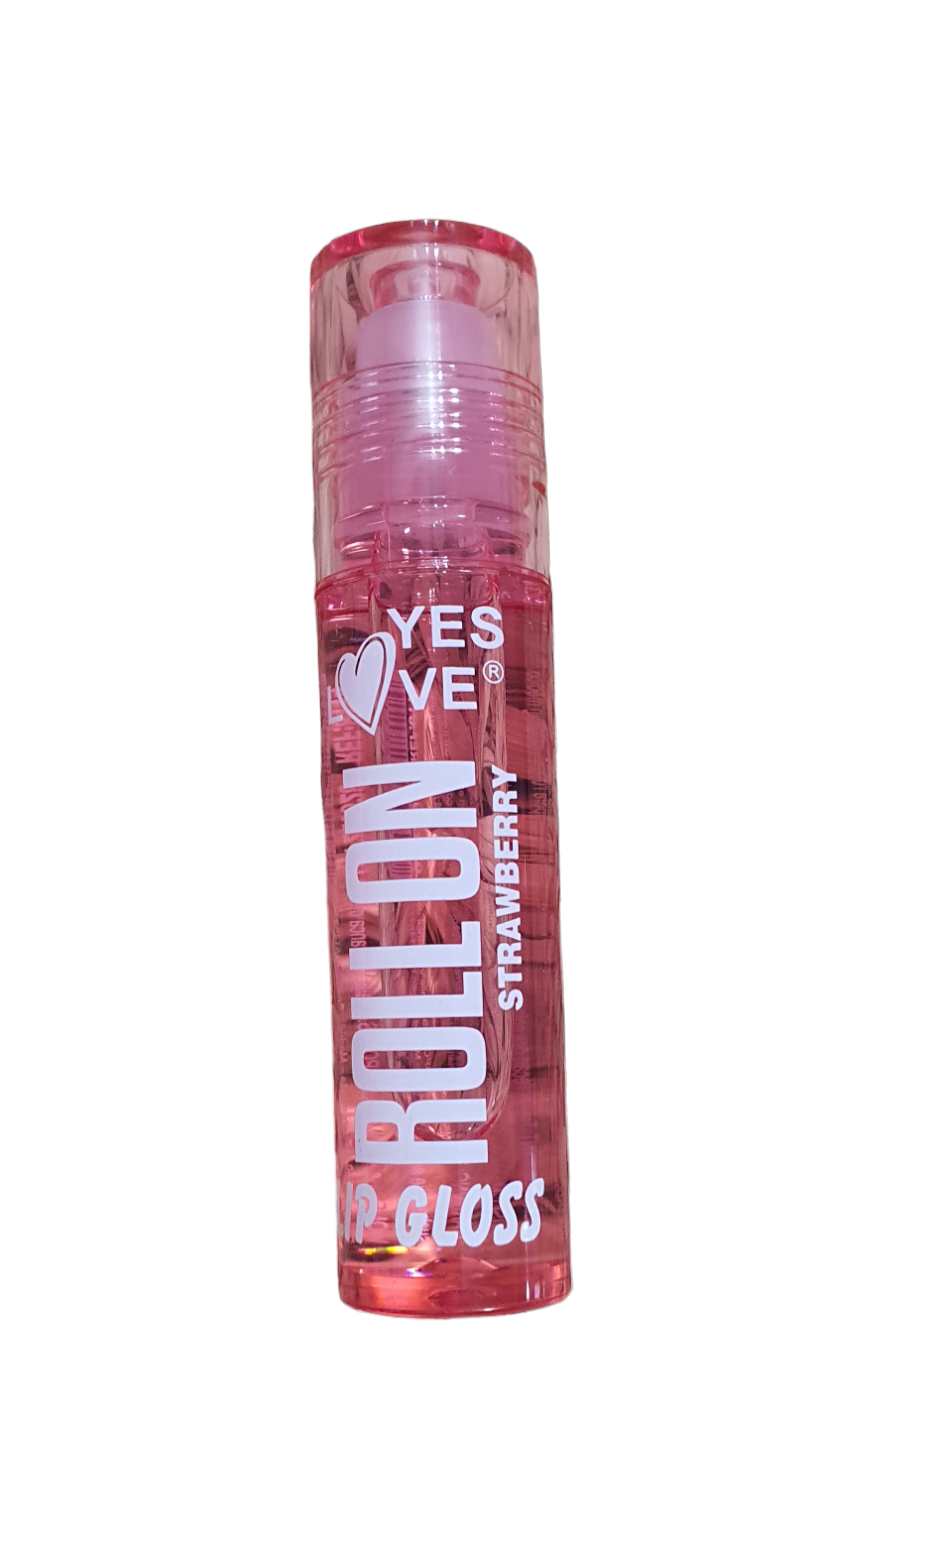 Gloss roll on fruité Yes love